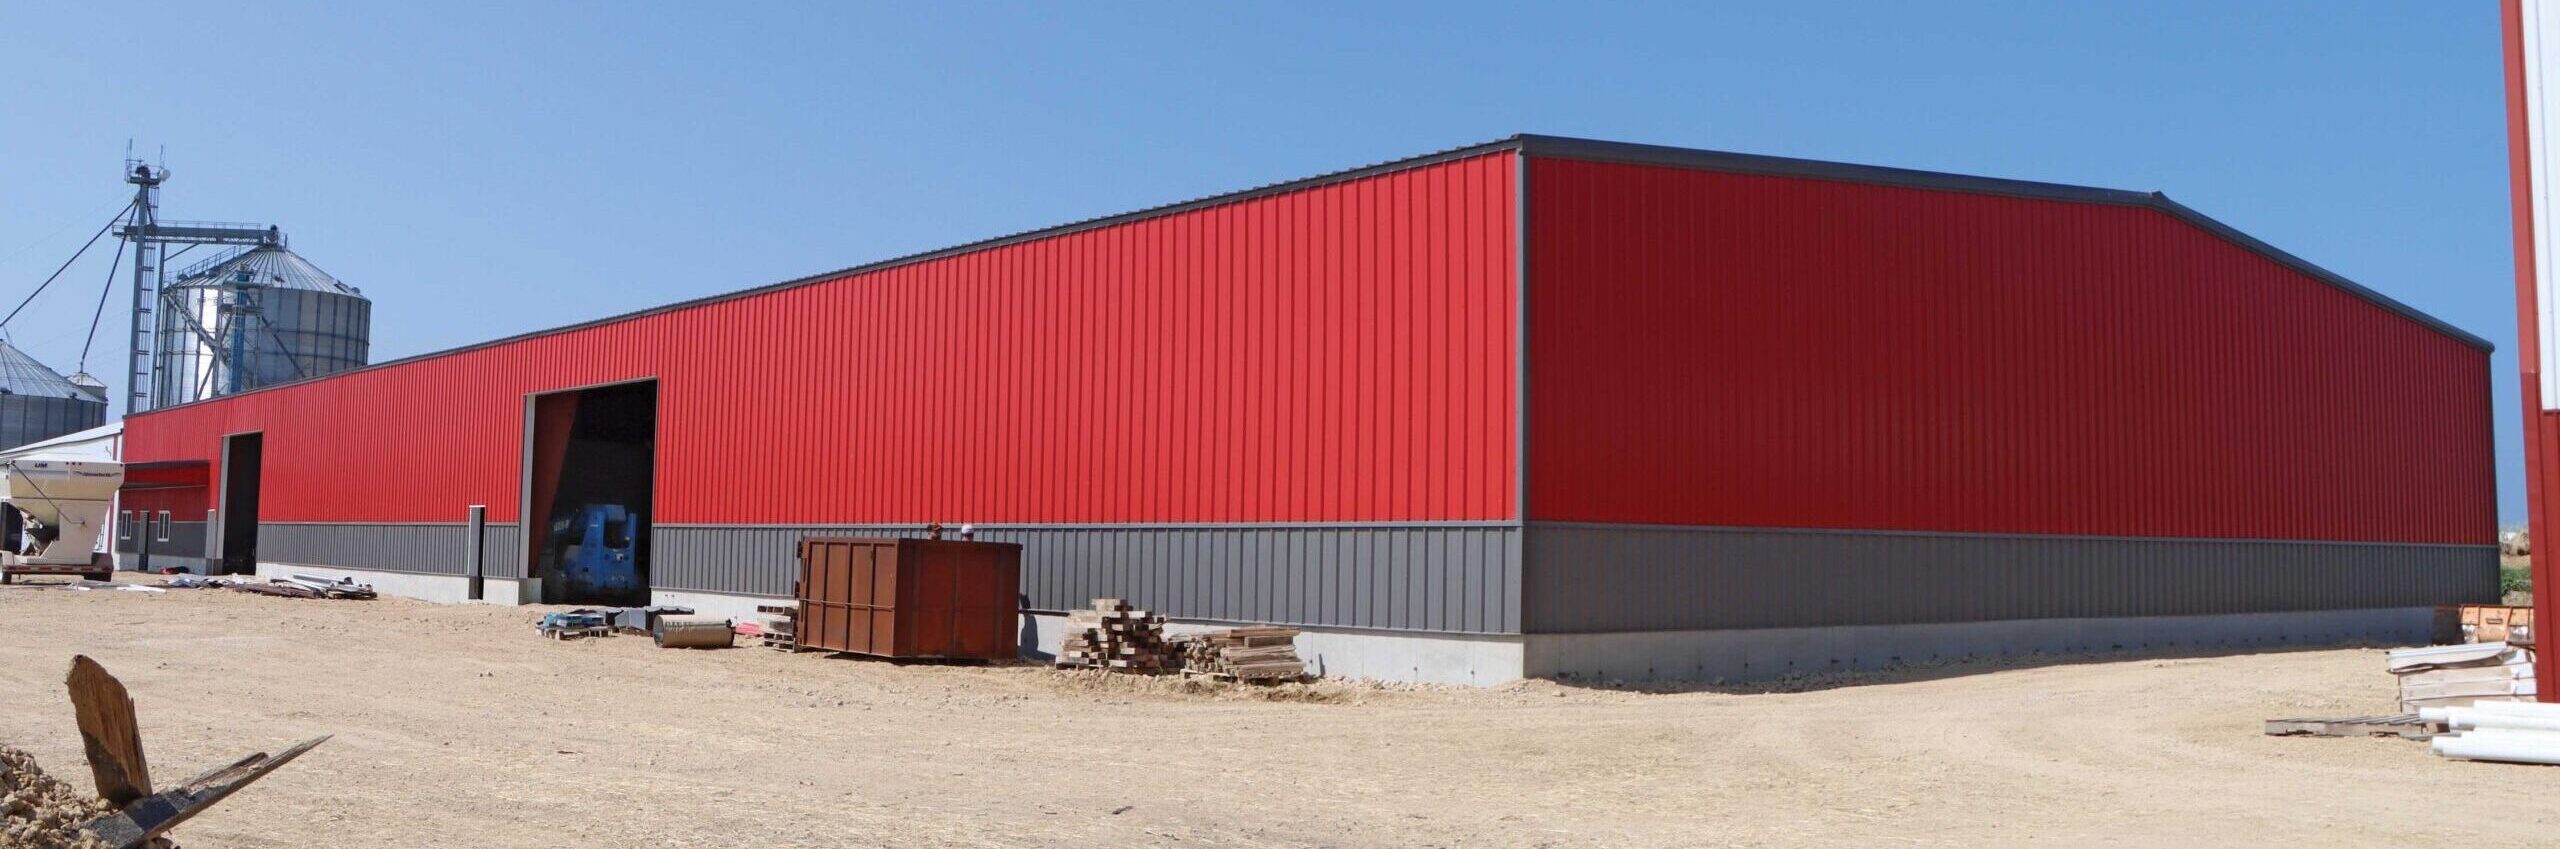 red and gray commercial modular building